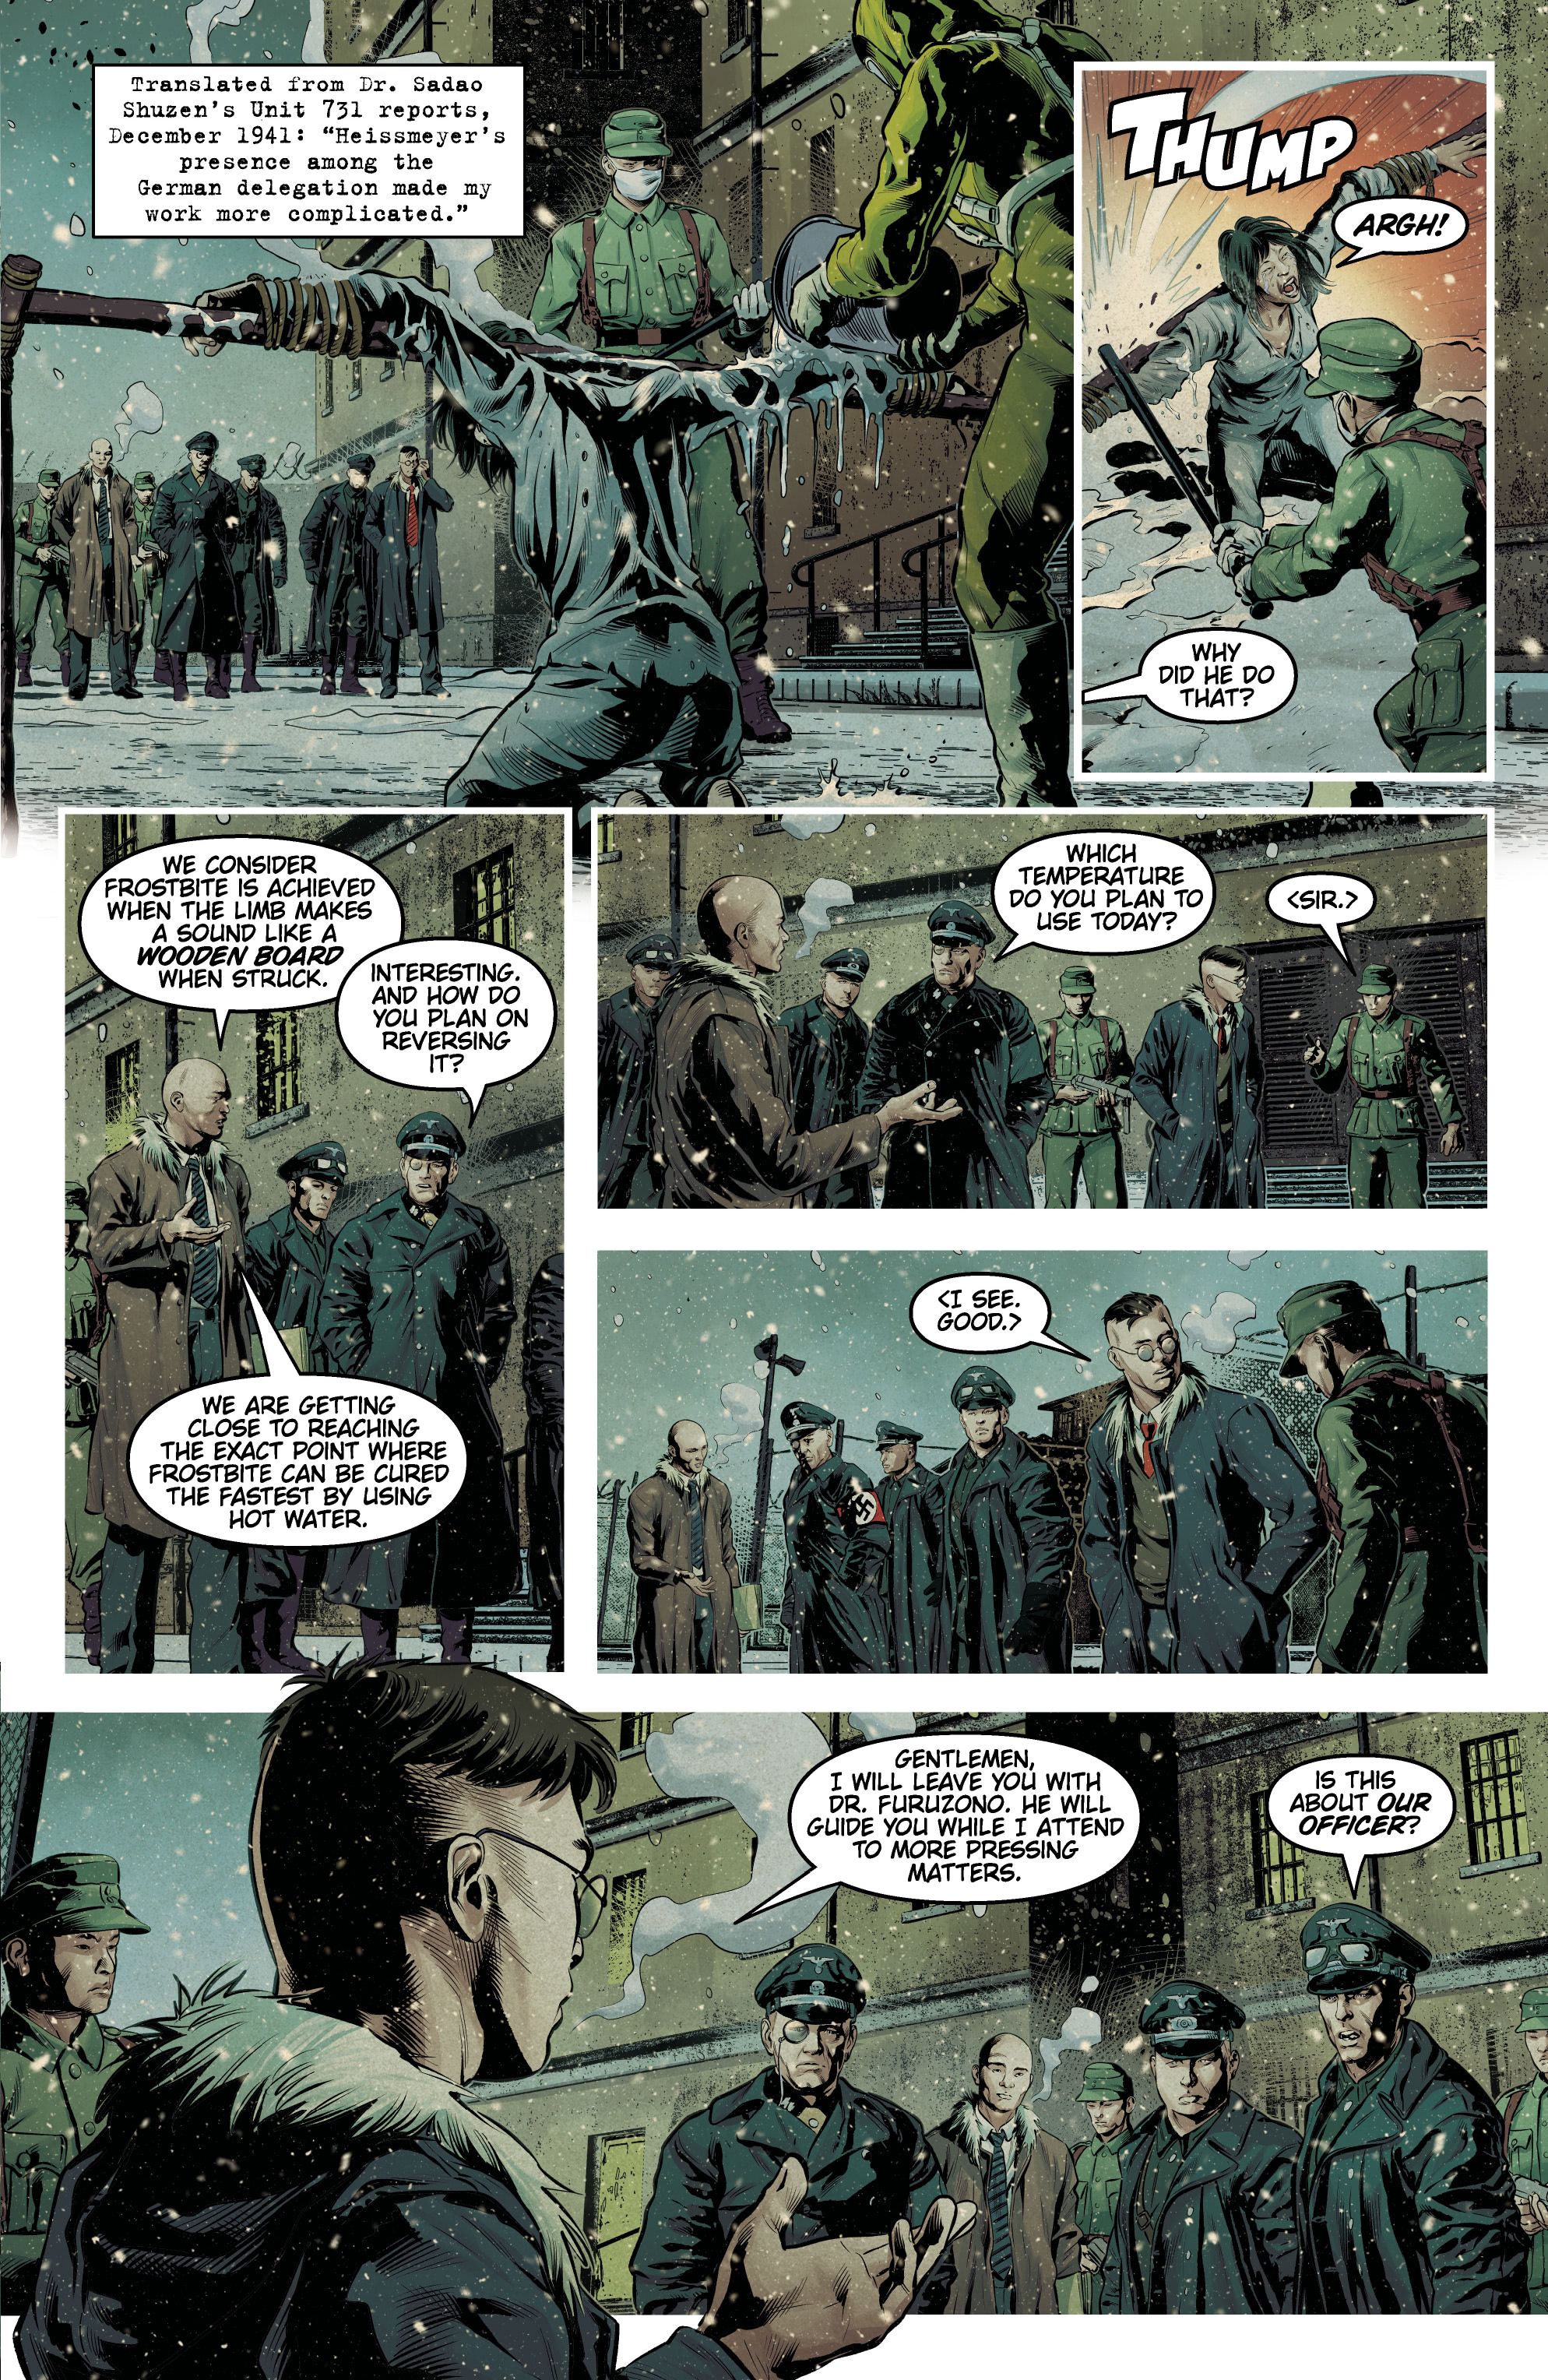 Read online The Collector: Unit 731 comic -  Issue #3 - 15